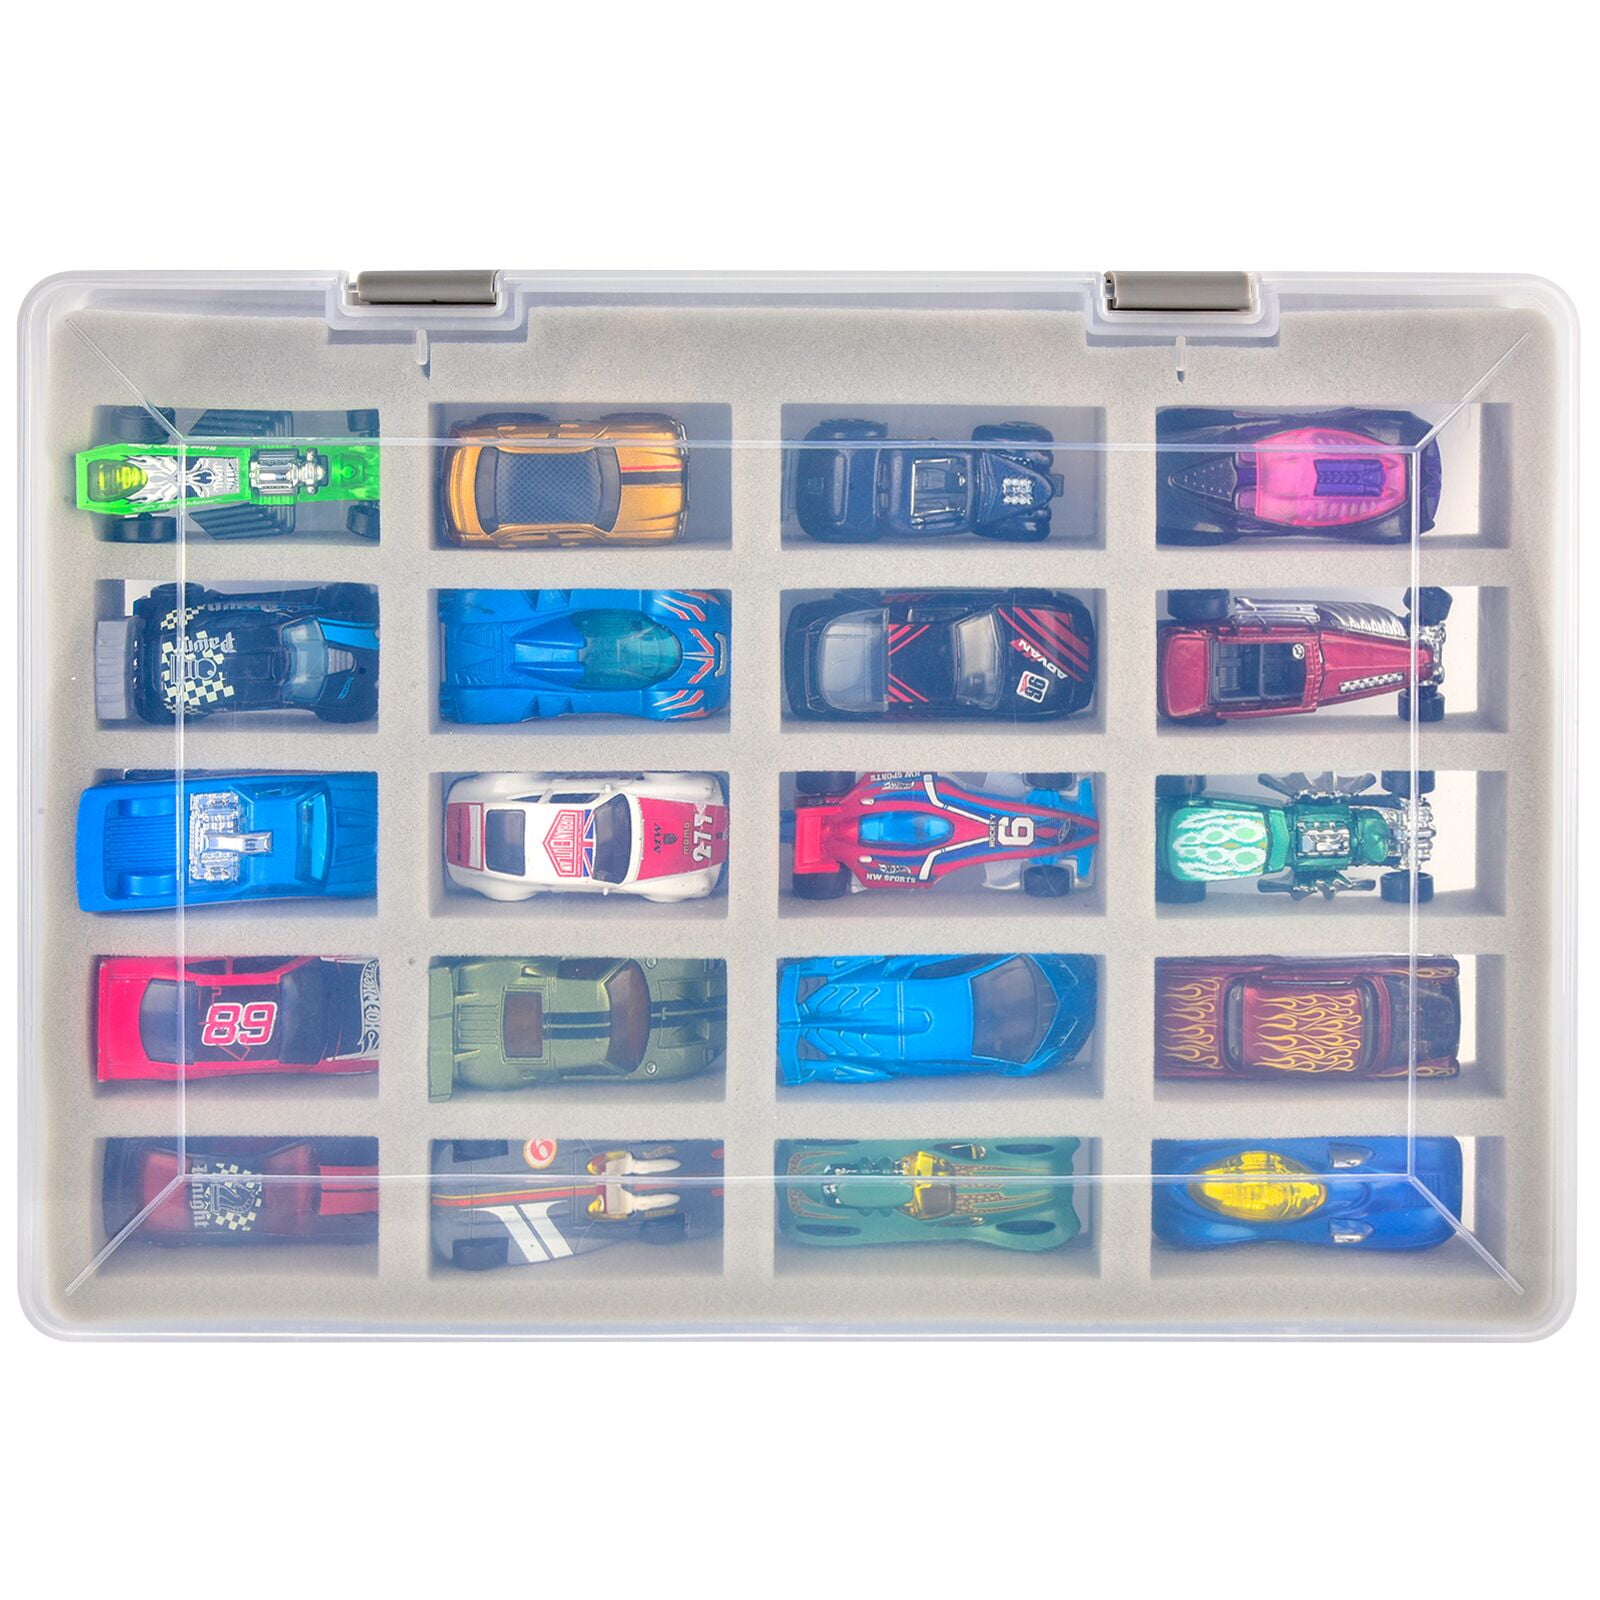 COMECASE 88 Toy Cars Storage Organizer Case for Matchbox Car (Black Box  Only) 